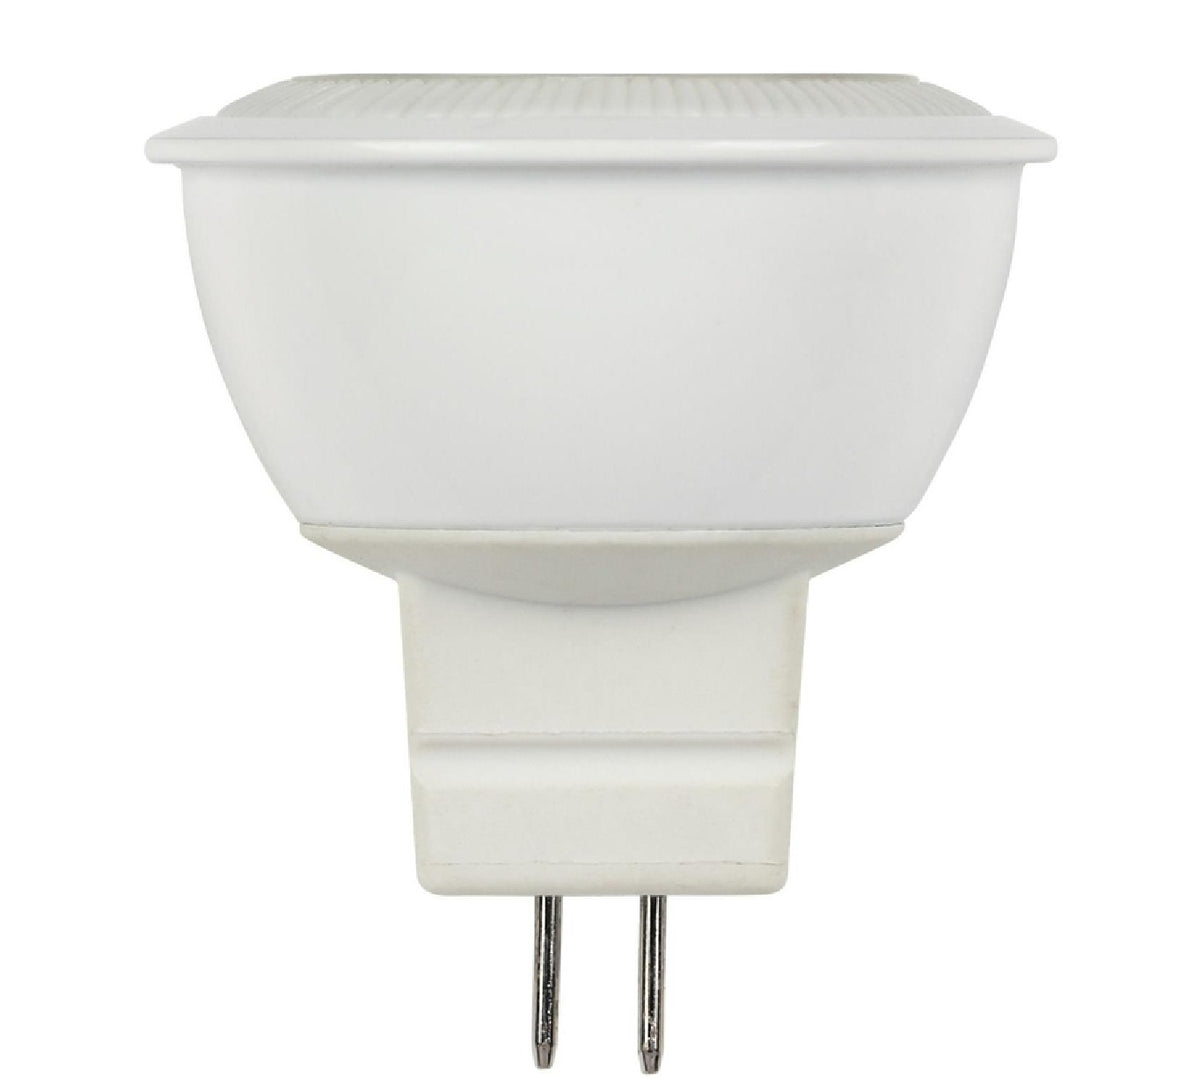 Westinghouse 0515200 30W Equivalent White MR11 Dimmable LED Light Bulb